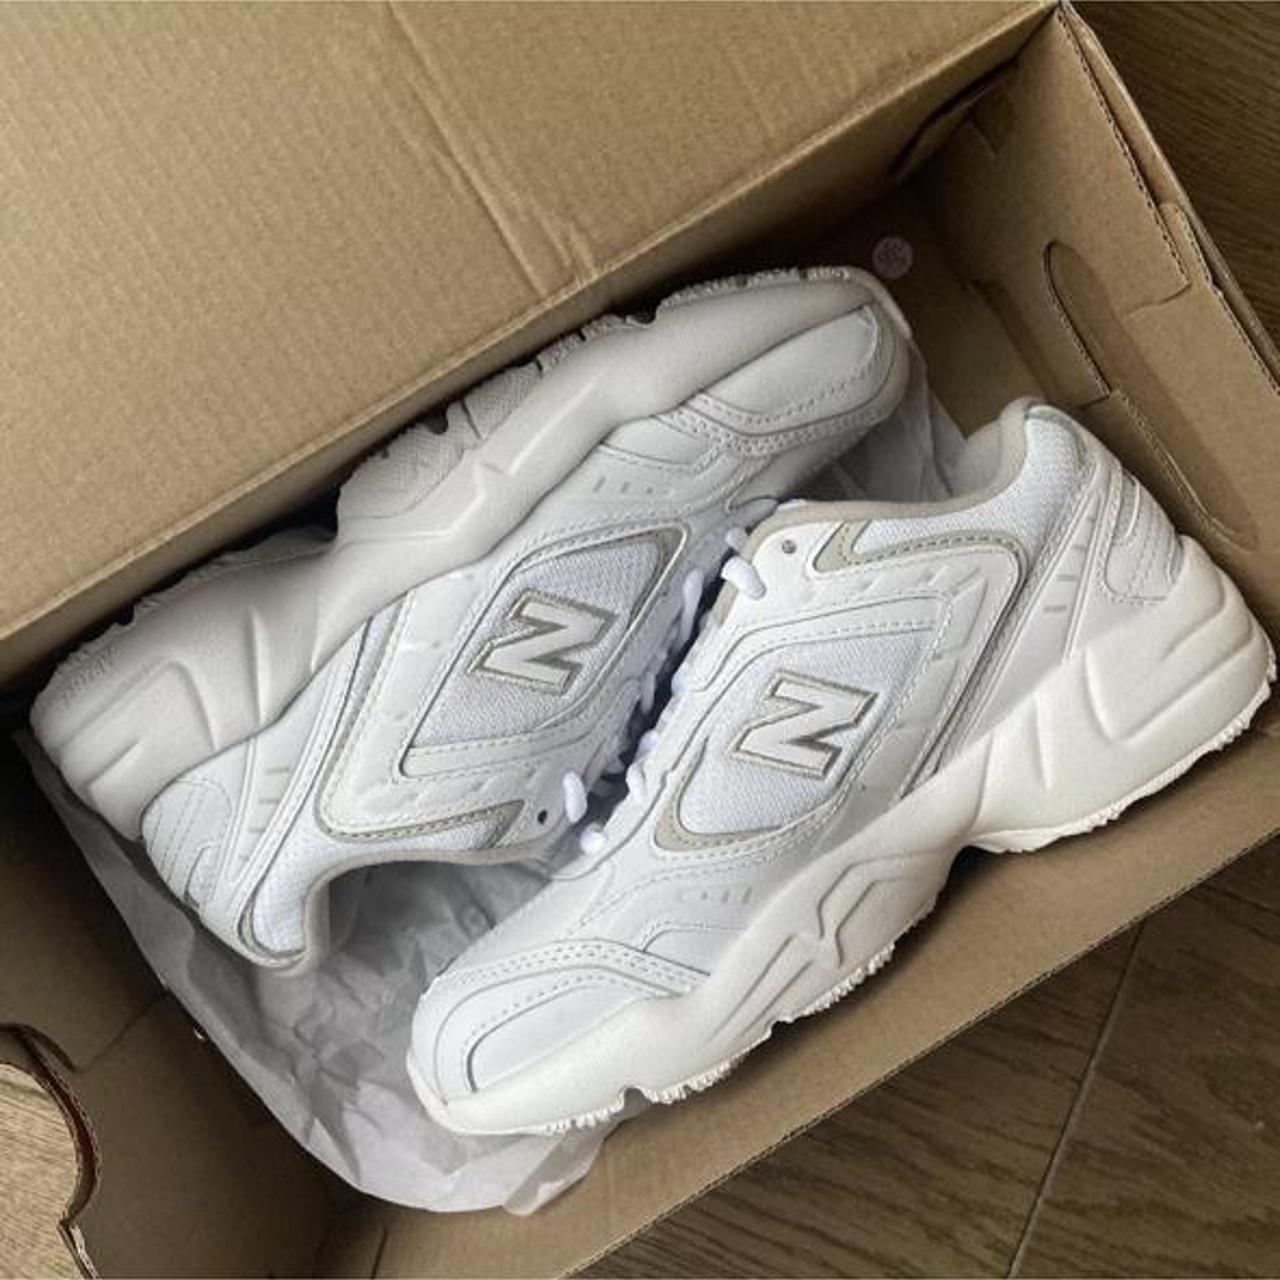 New Balance 452 Chunky Trainers In White Light Depop